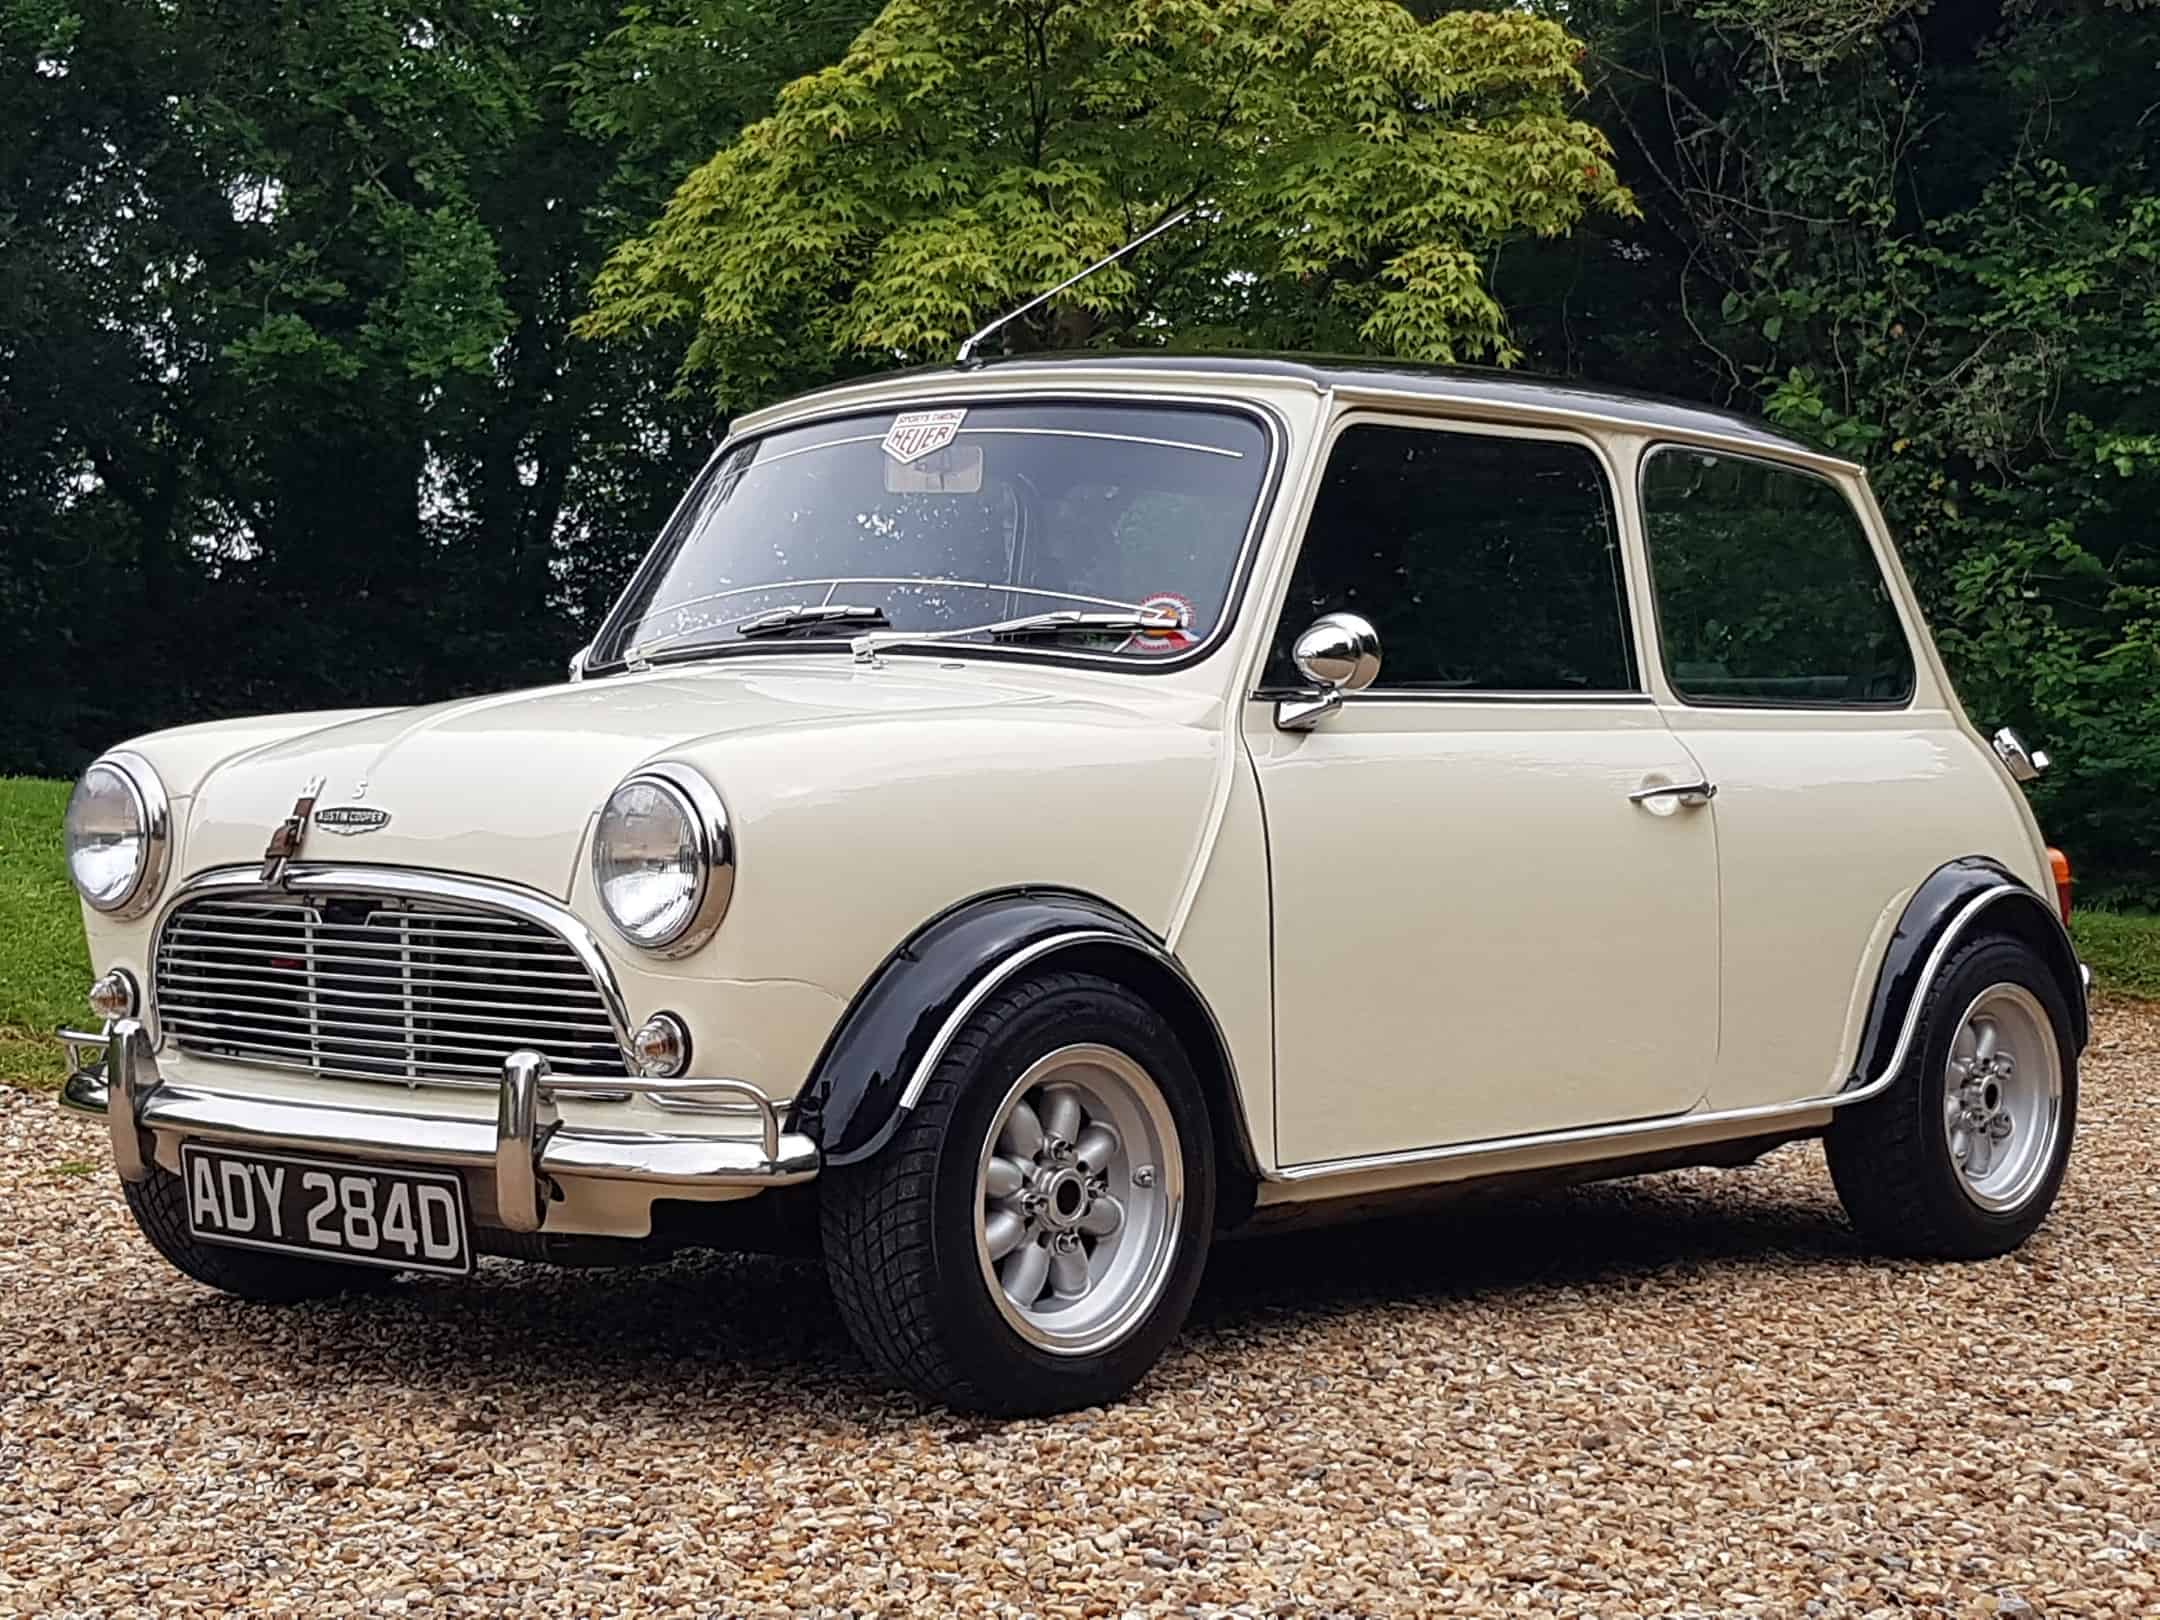 ** NOW SOLD ** Fantastic Fast Road 1293 cc Mini In Stunning Condition.